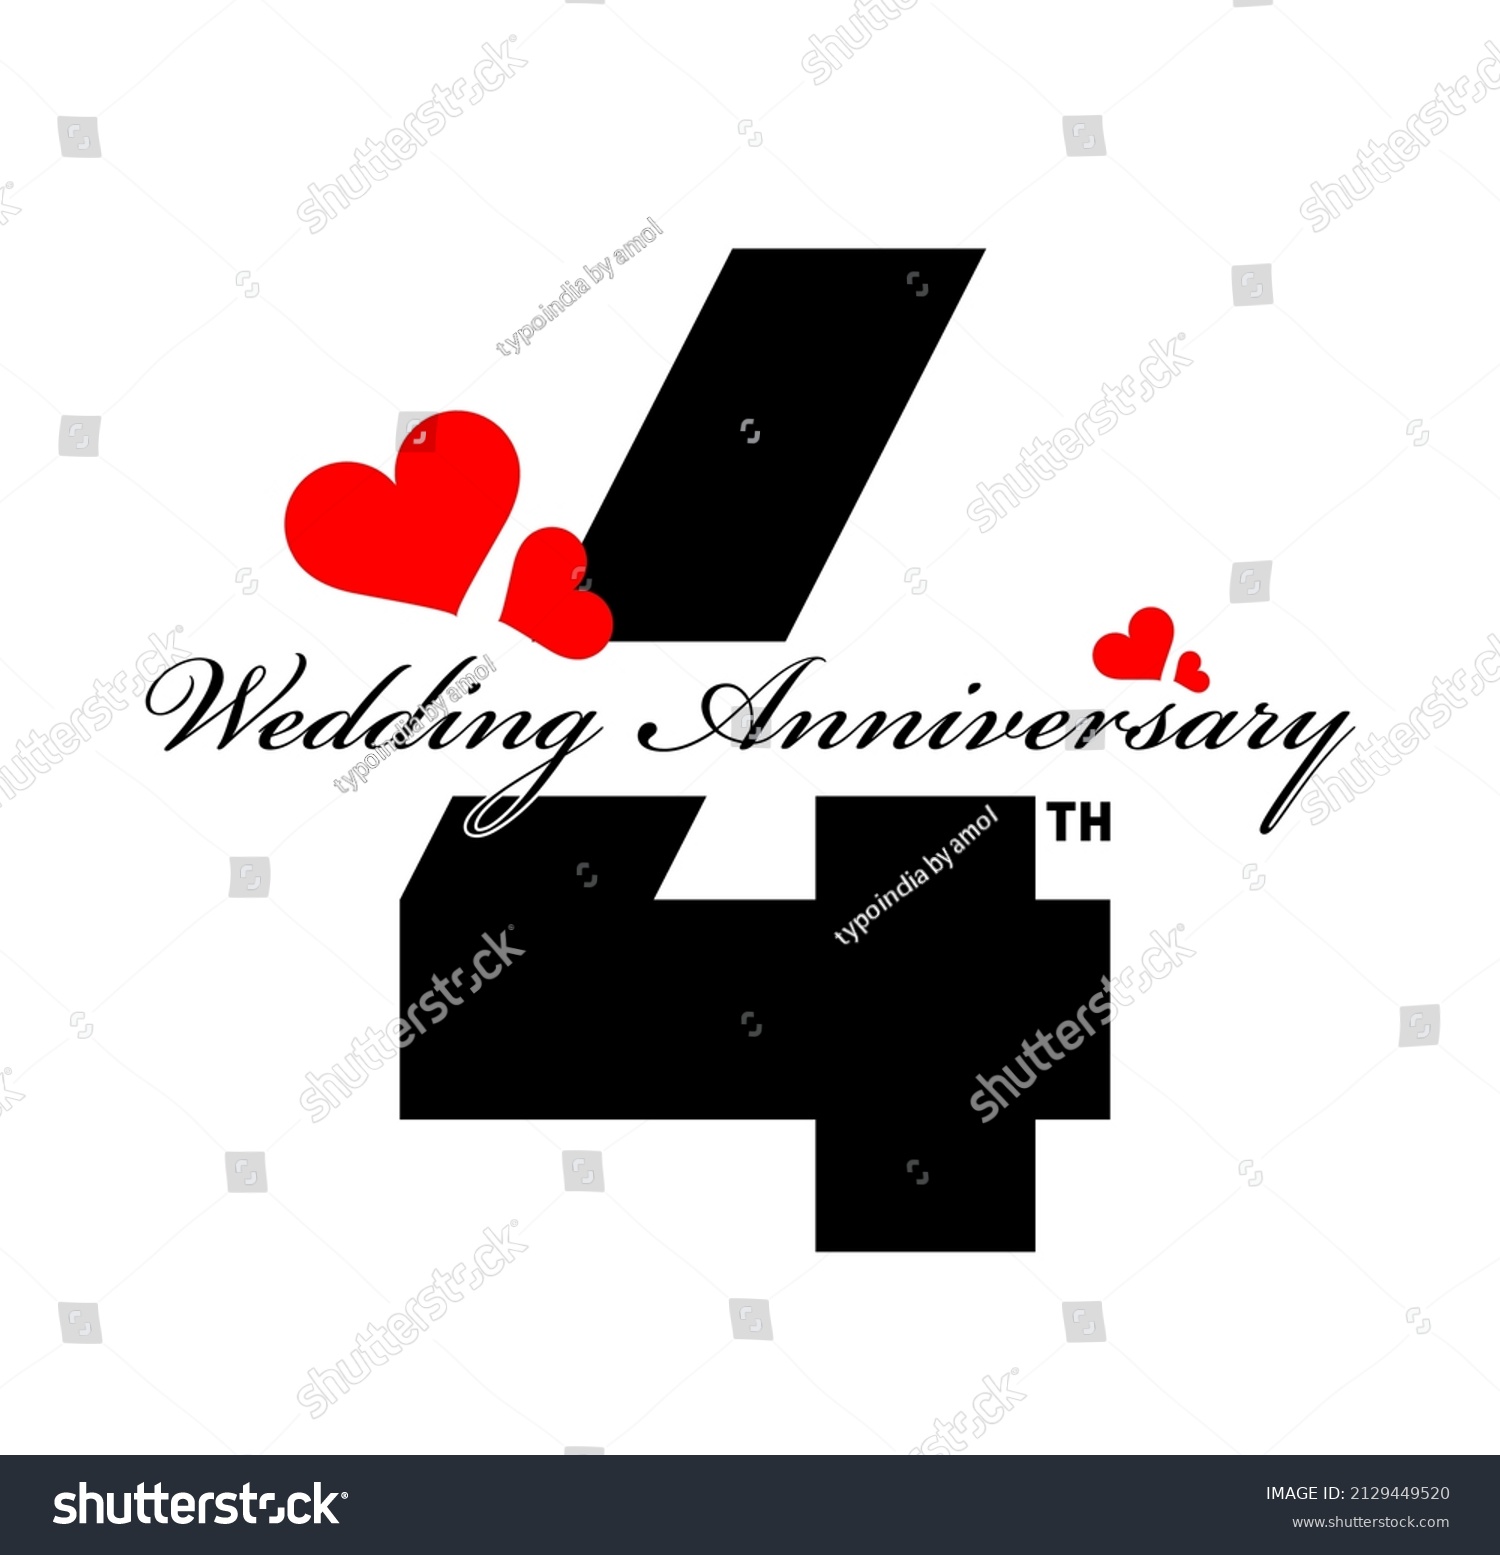 SVG of 4th Wedding Anniversary greeting with red hearts illustration. Happy Wedding Anniversary post.  svg